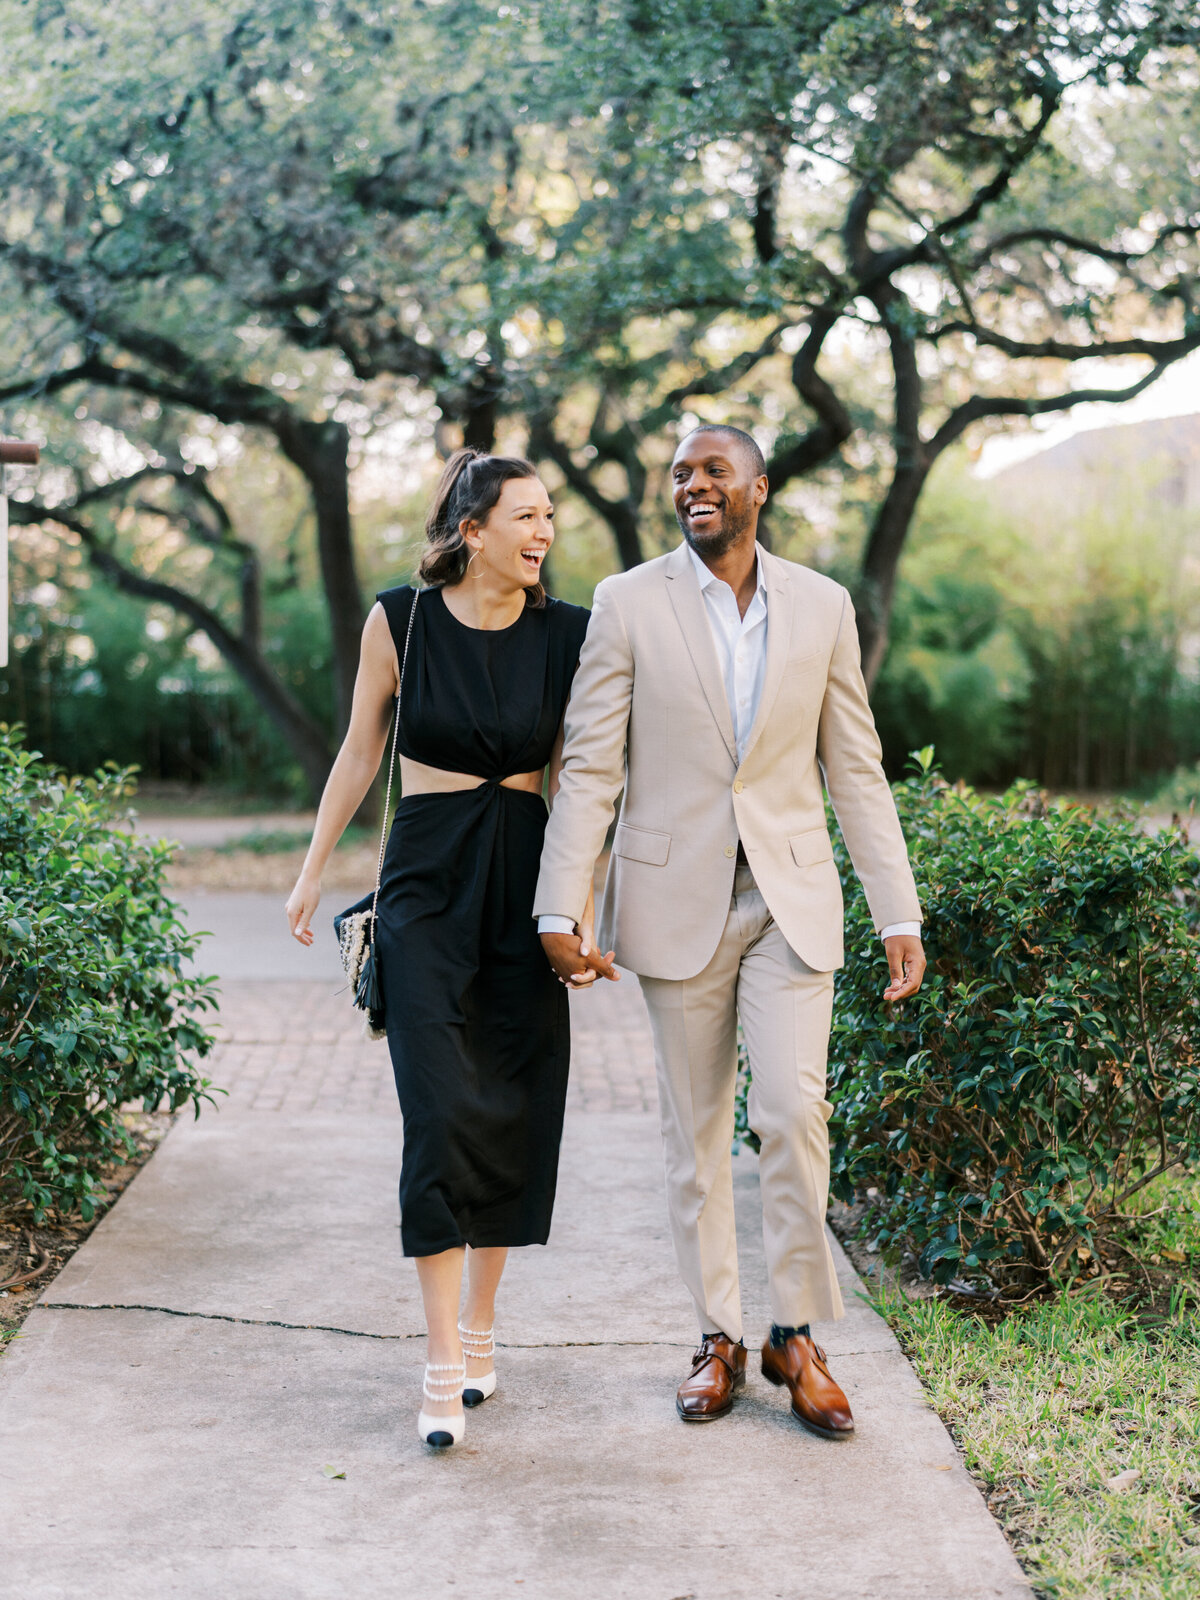 Rehearsal dinner photography at historic venues Austin